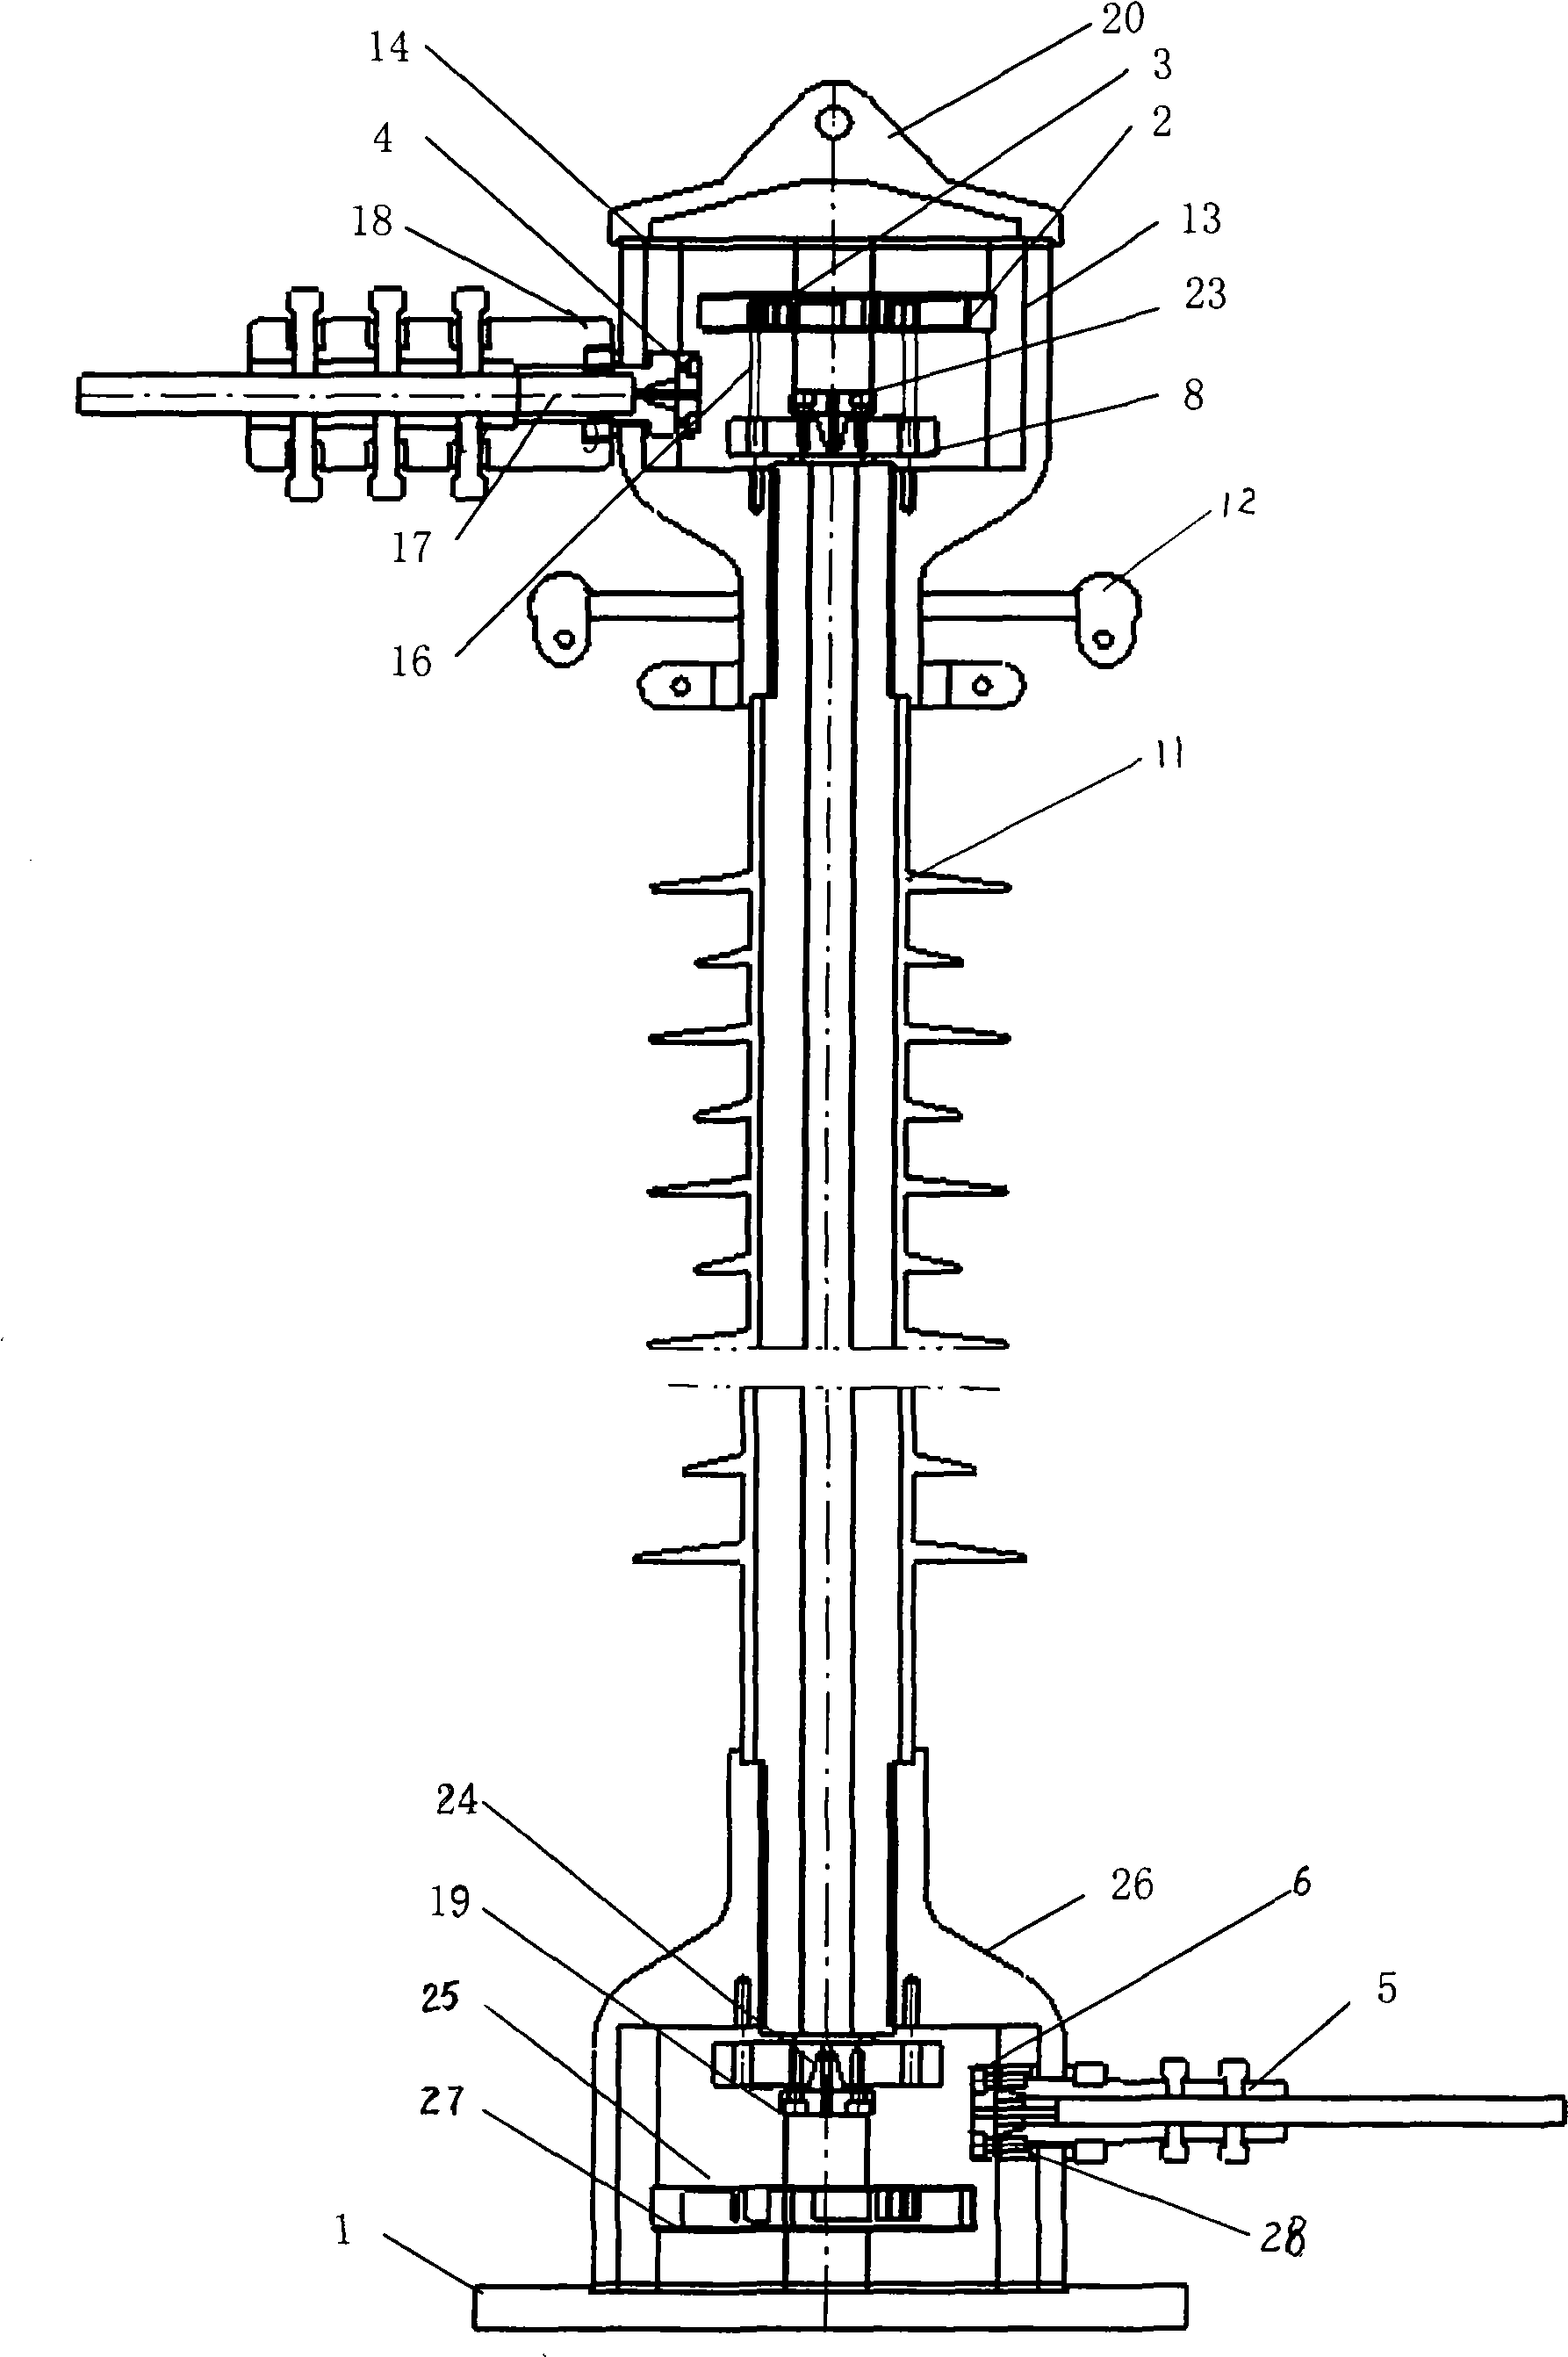 Terminal connection box for optical phase conductor